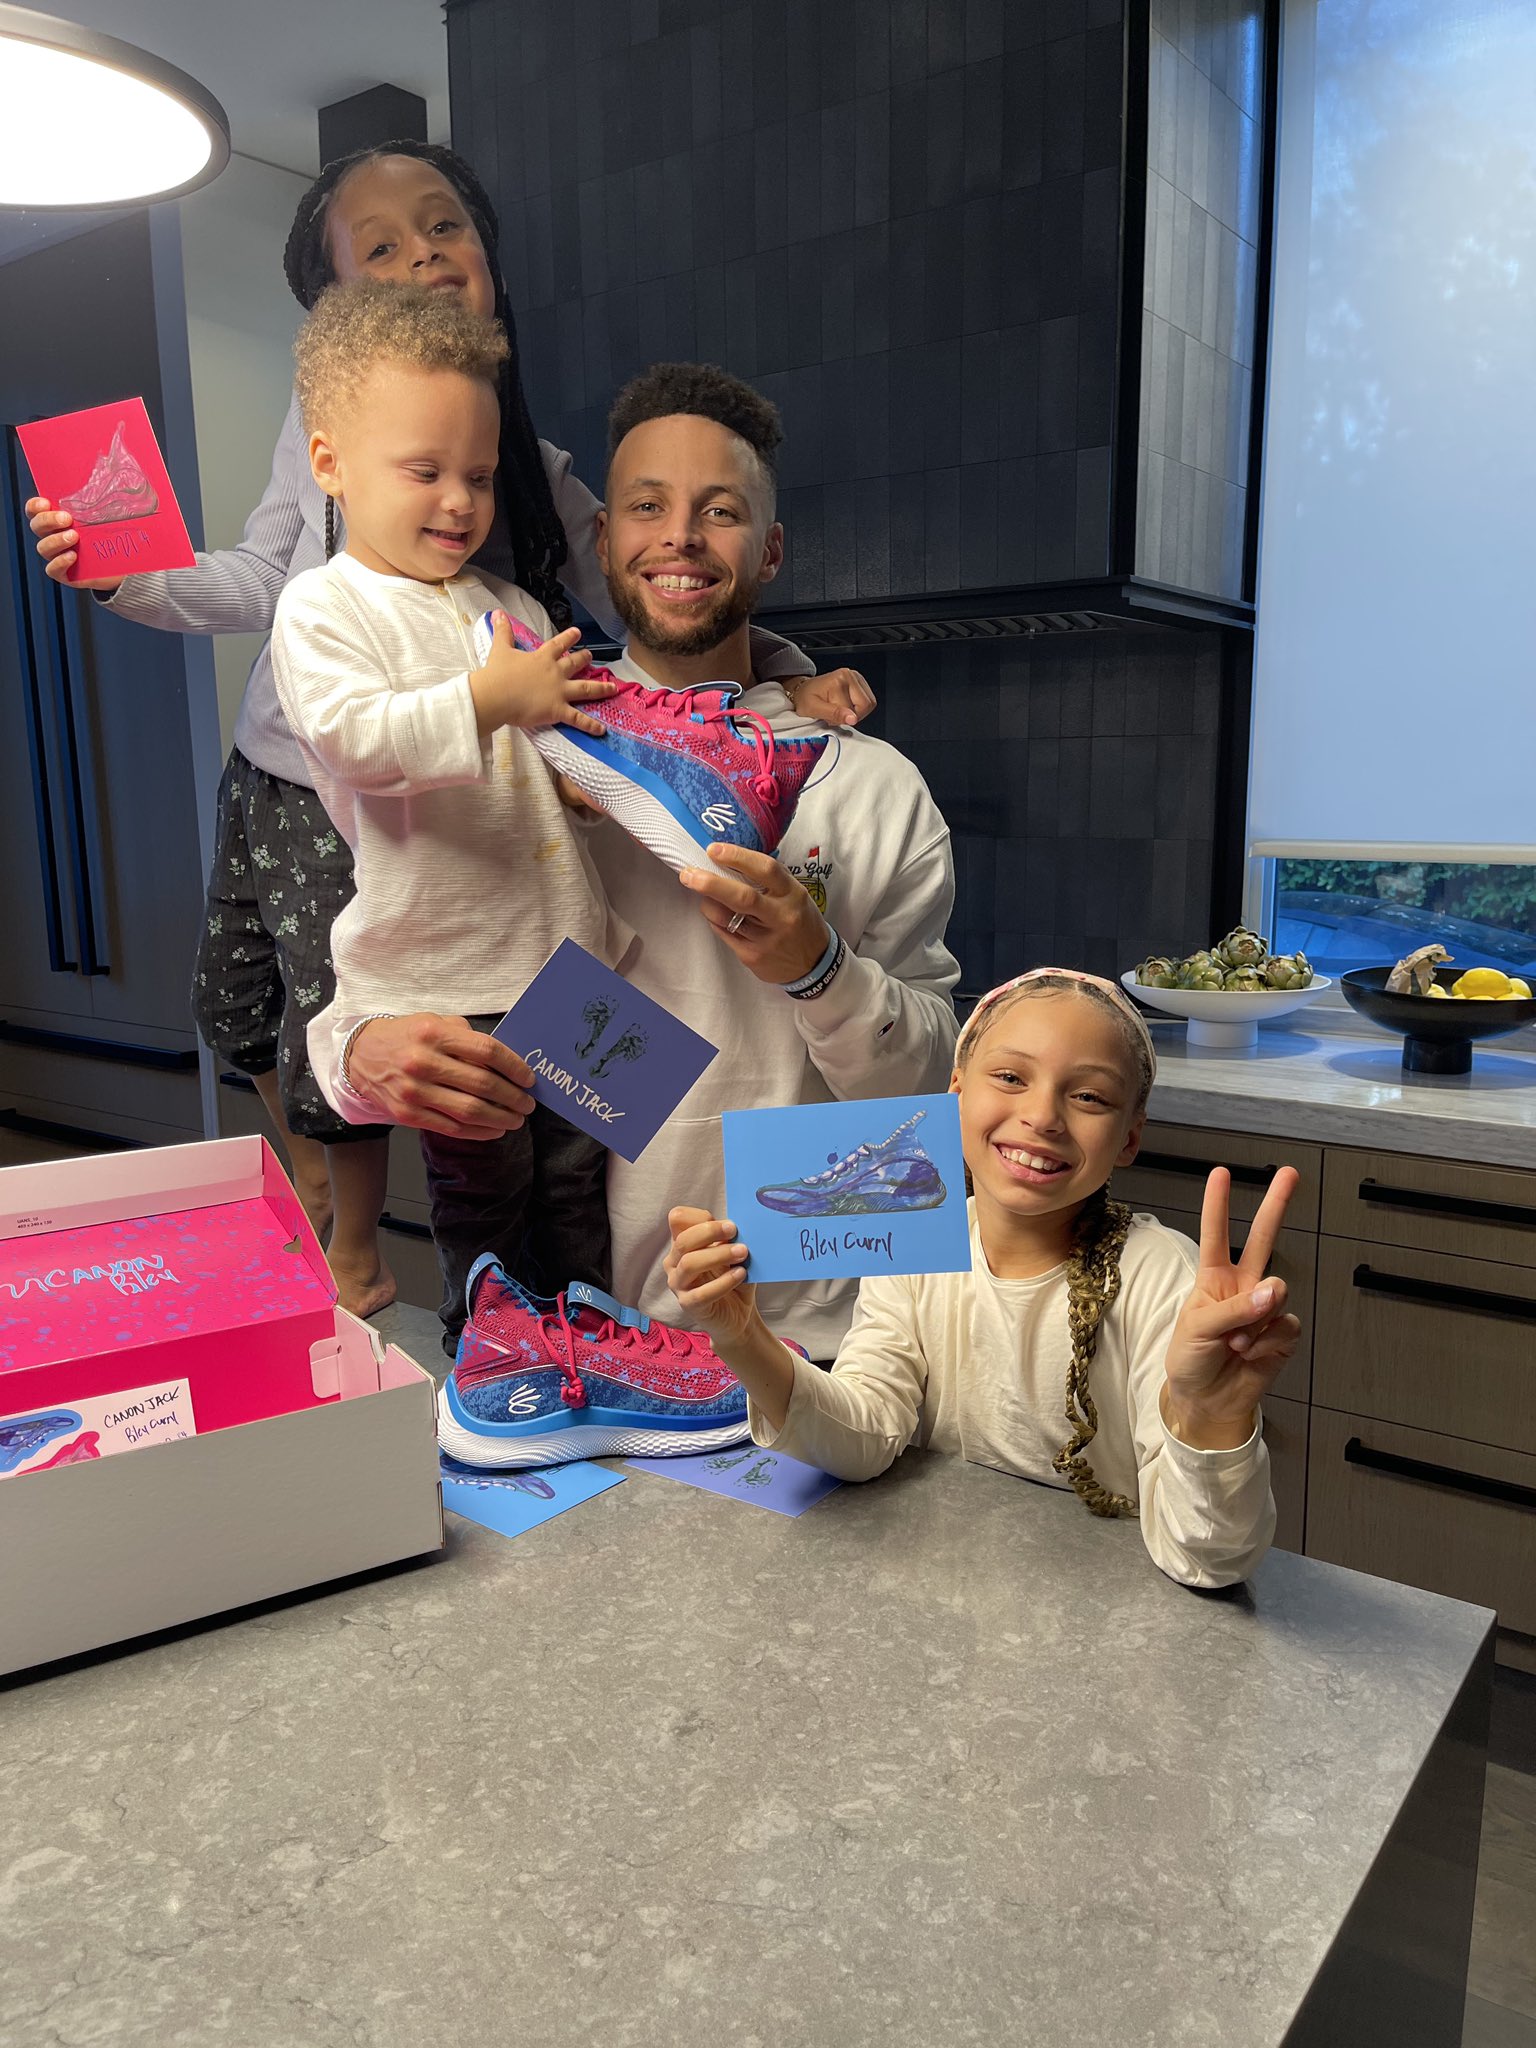 Stephen Curry on X: "My kids came through in the clutch with a nice  surprise for the 33rd Bday. Had no clue they knew how to design some shoes,  but the scavenger